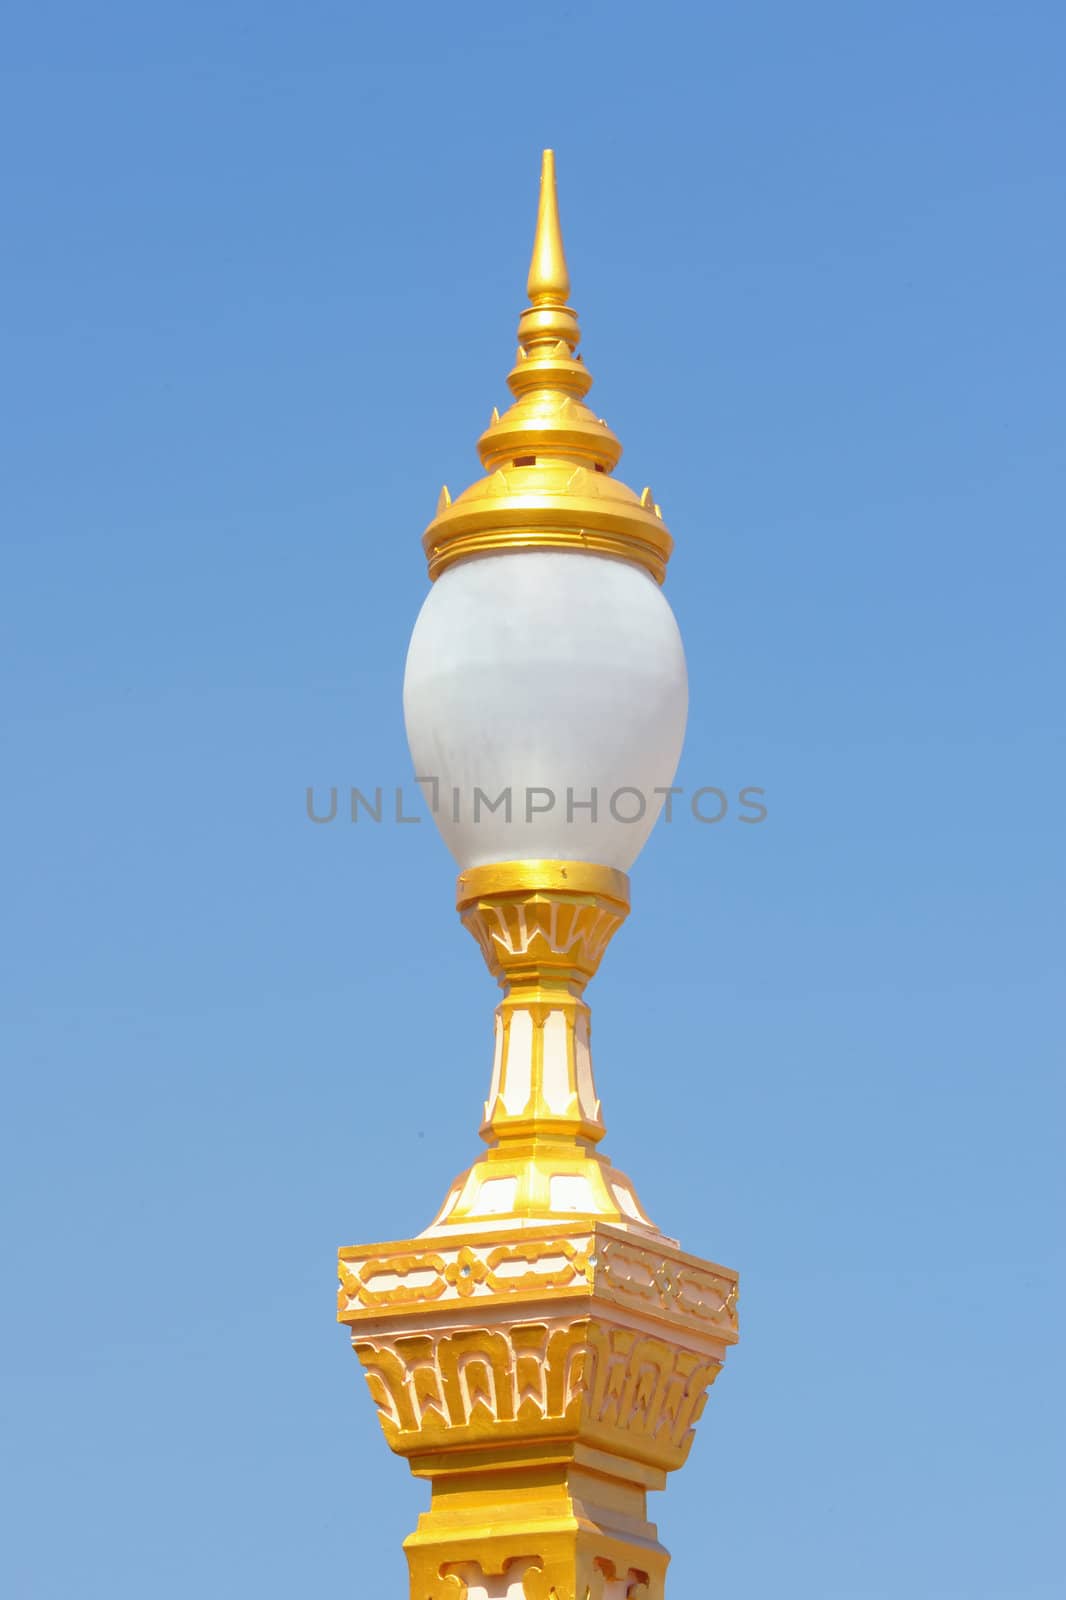 Thai antique lamp with blue sky. by ngungfoto